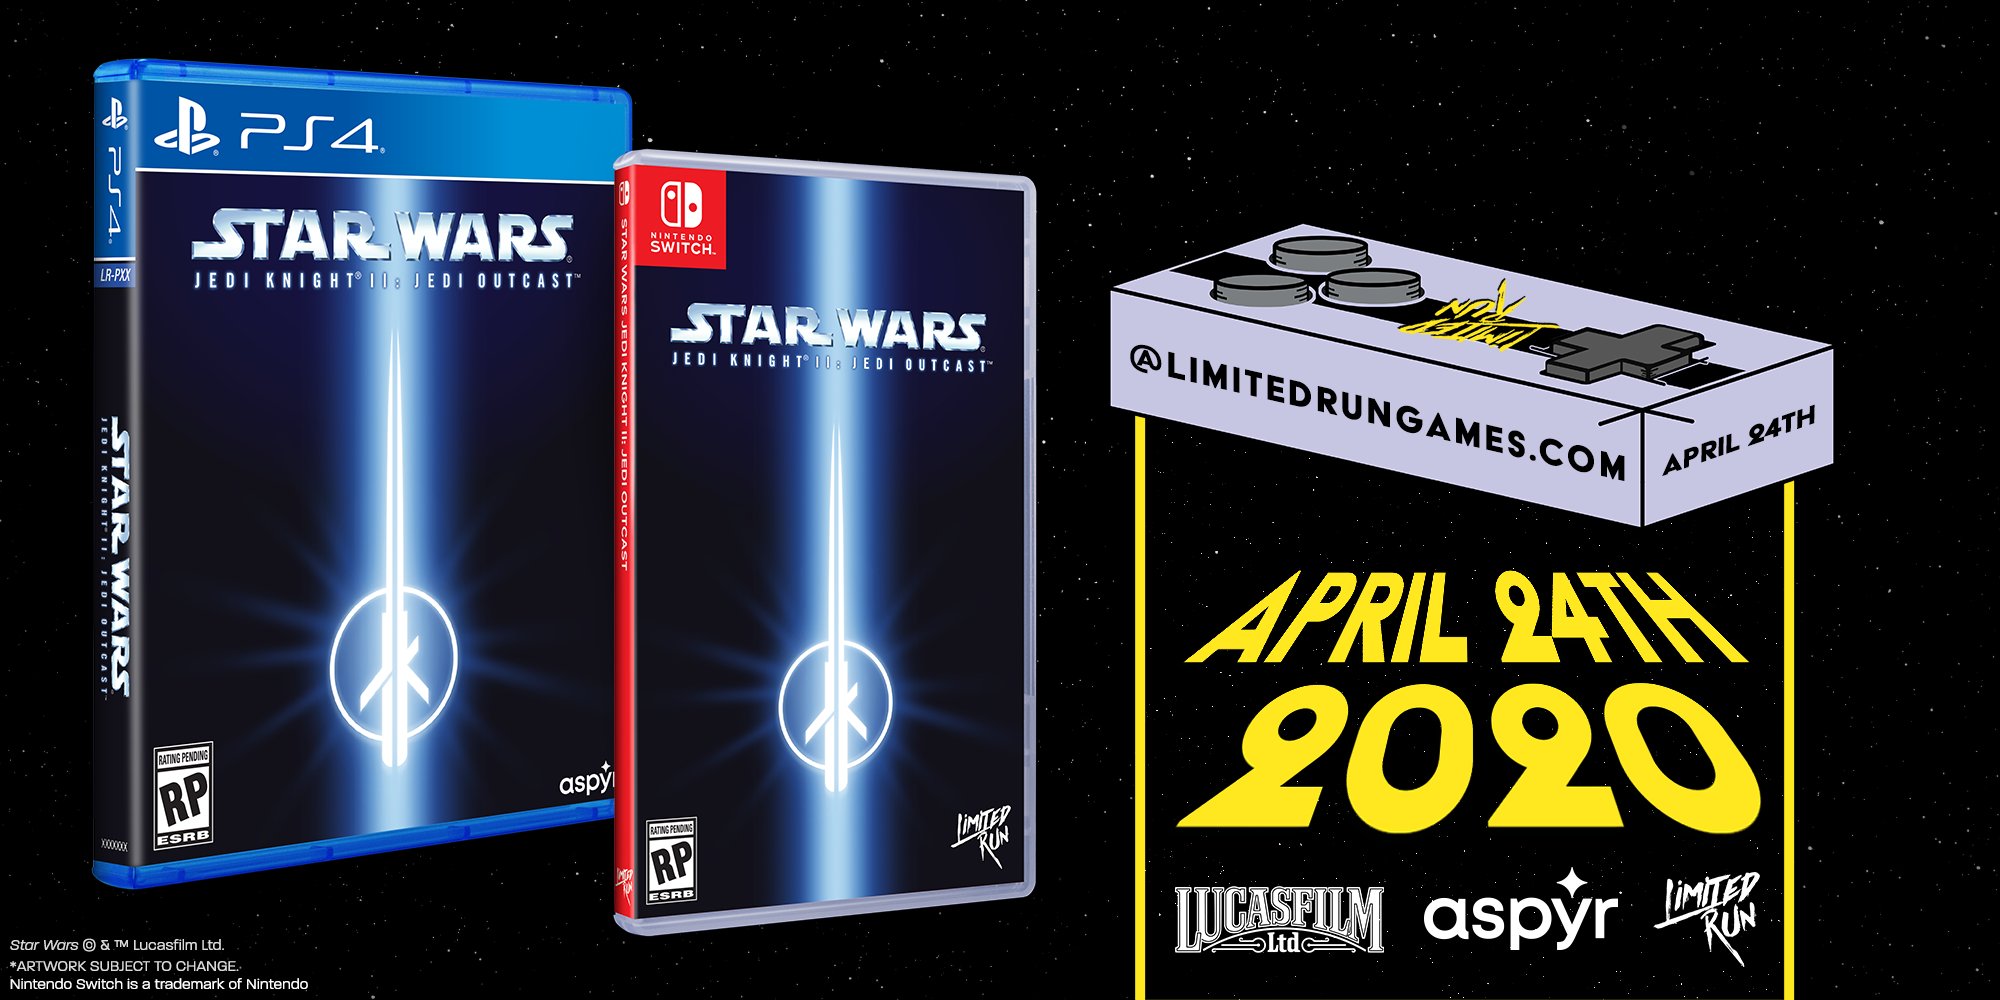 Limited Run Games on Twitter: "It's up to Kyle Katarn to Dark Jedi Desann, whether he likes it or not. Star Wars Jedi Knight II: Jedi gets Limited Run